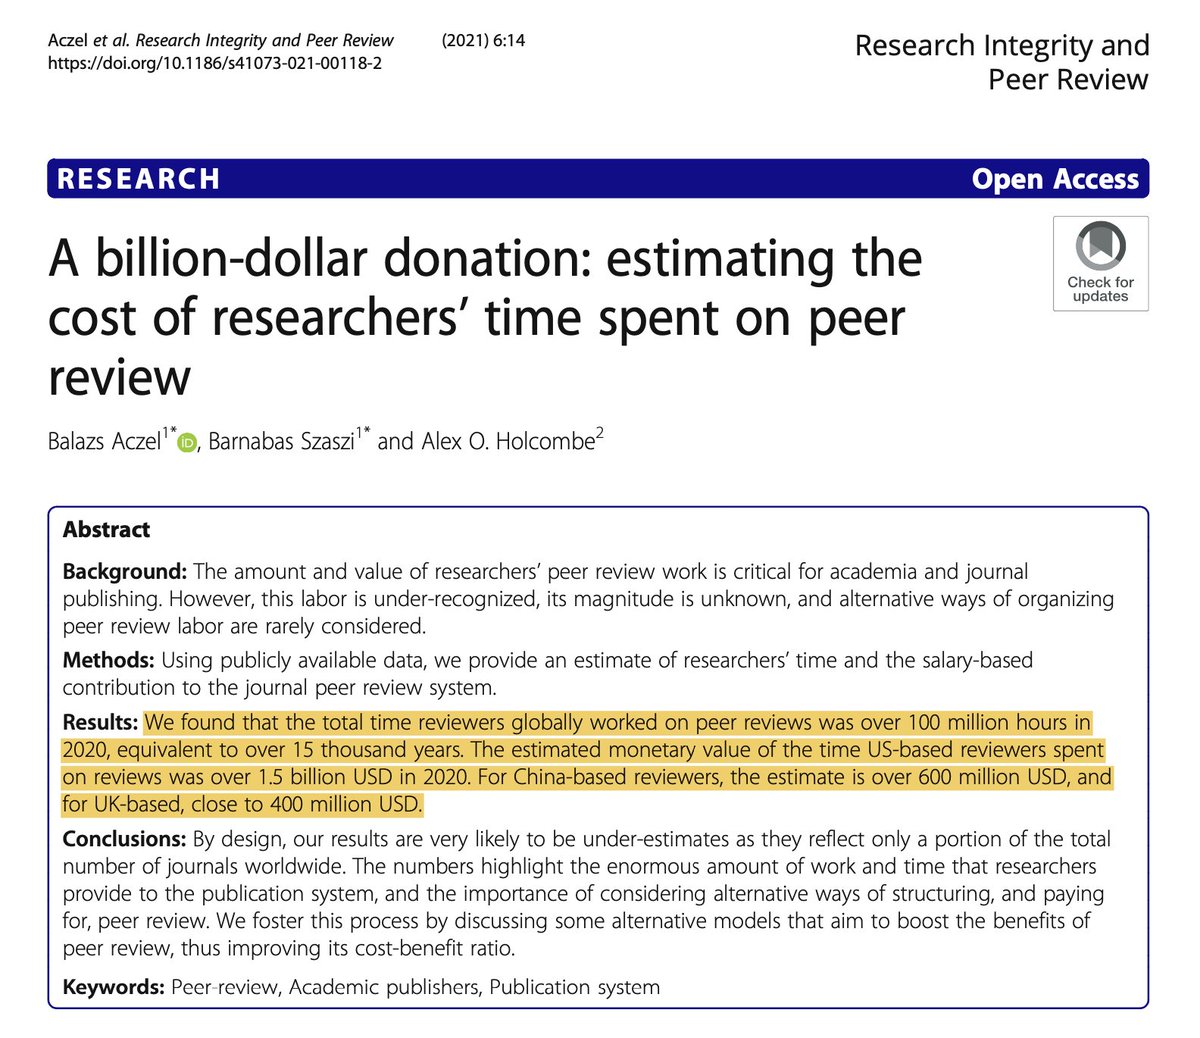 'A billion-dollar donation: estimating the cost of researchers’ time spent on peer review' --> bit.ly/3wQxp5o